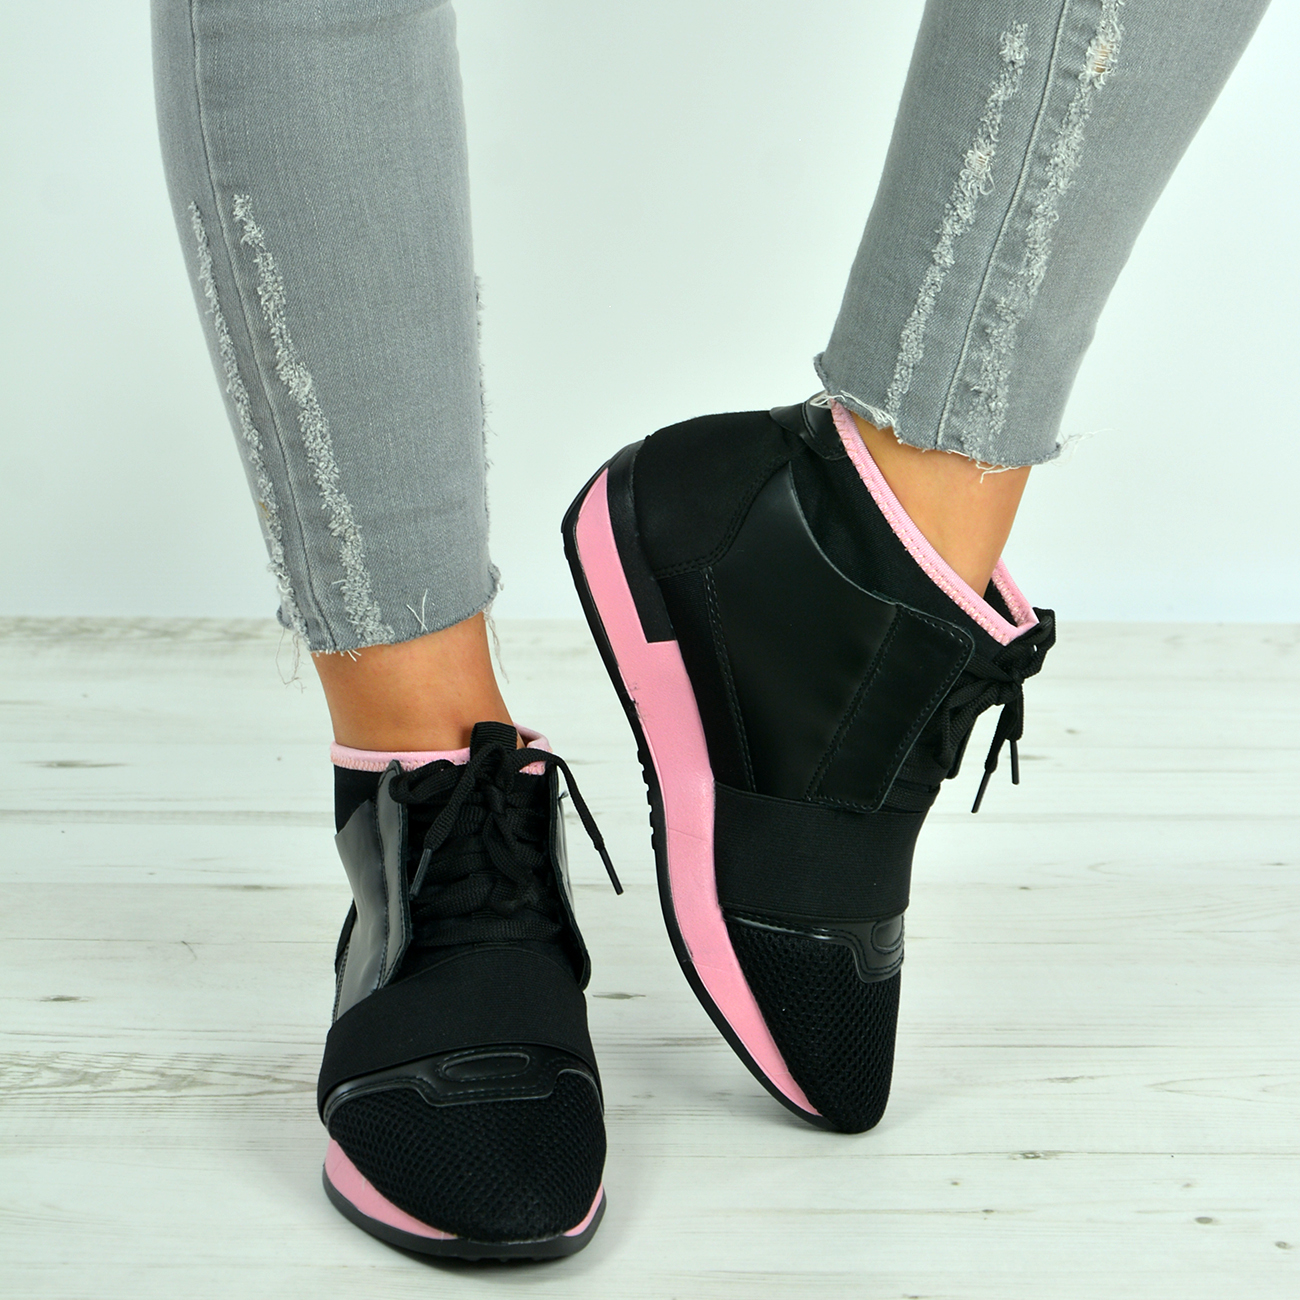 Ladies Sneakers Running Shoes Size Uk 